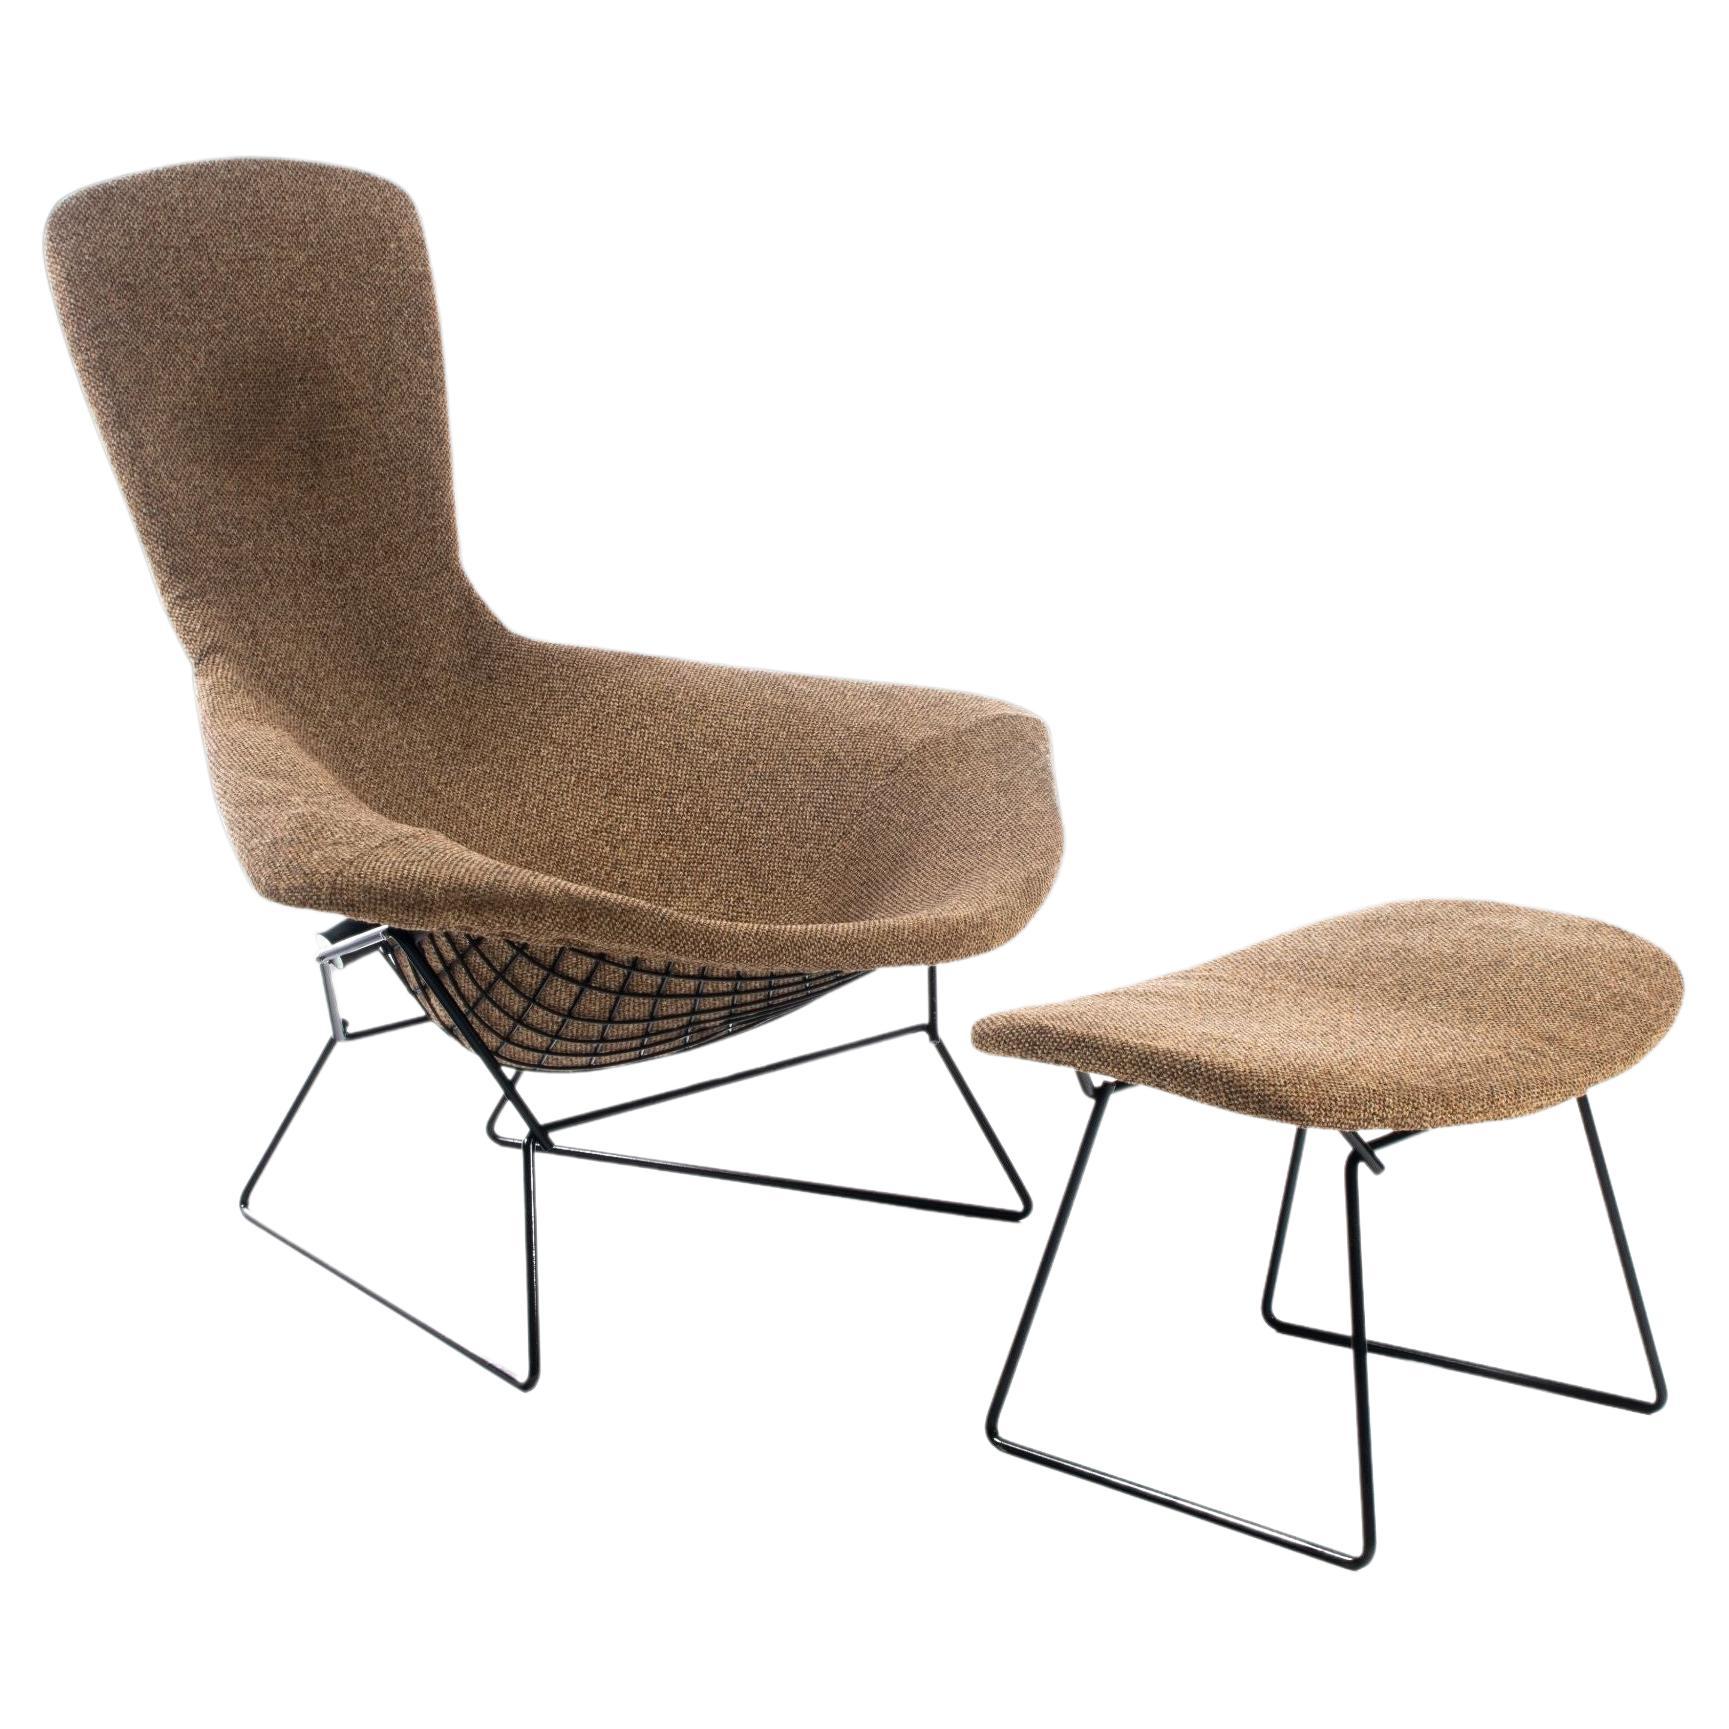 Authentic Bird Lounge Chair and Ottoman by Harry Bertoia for Knoll, USA, 1960s For Sale